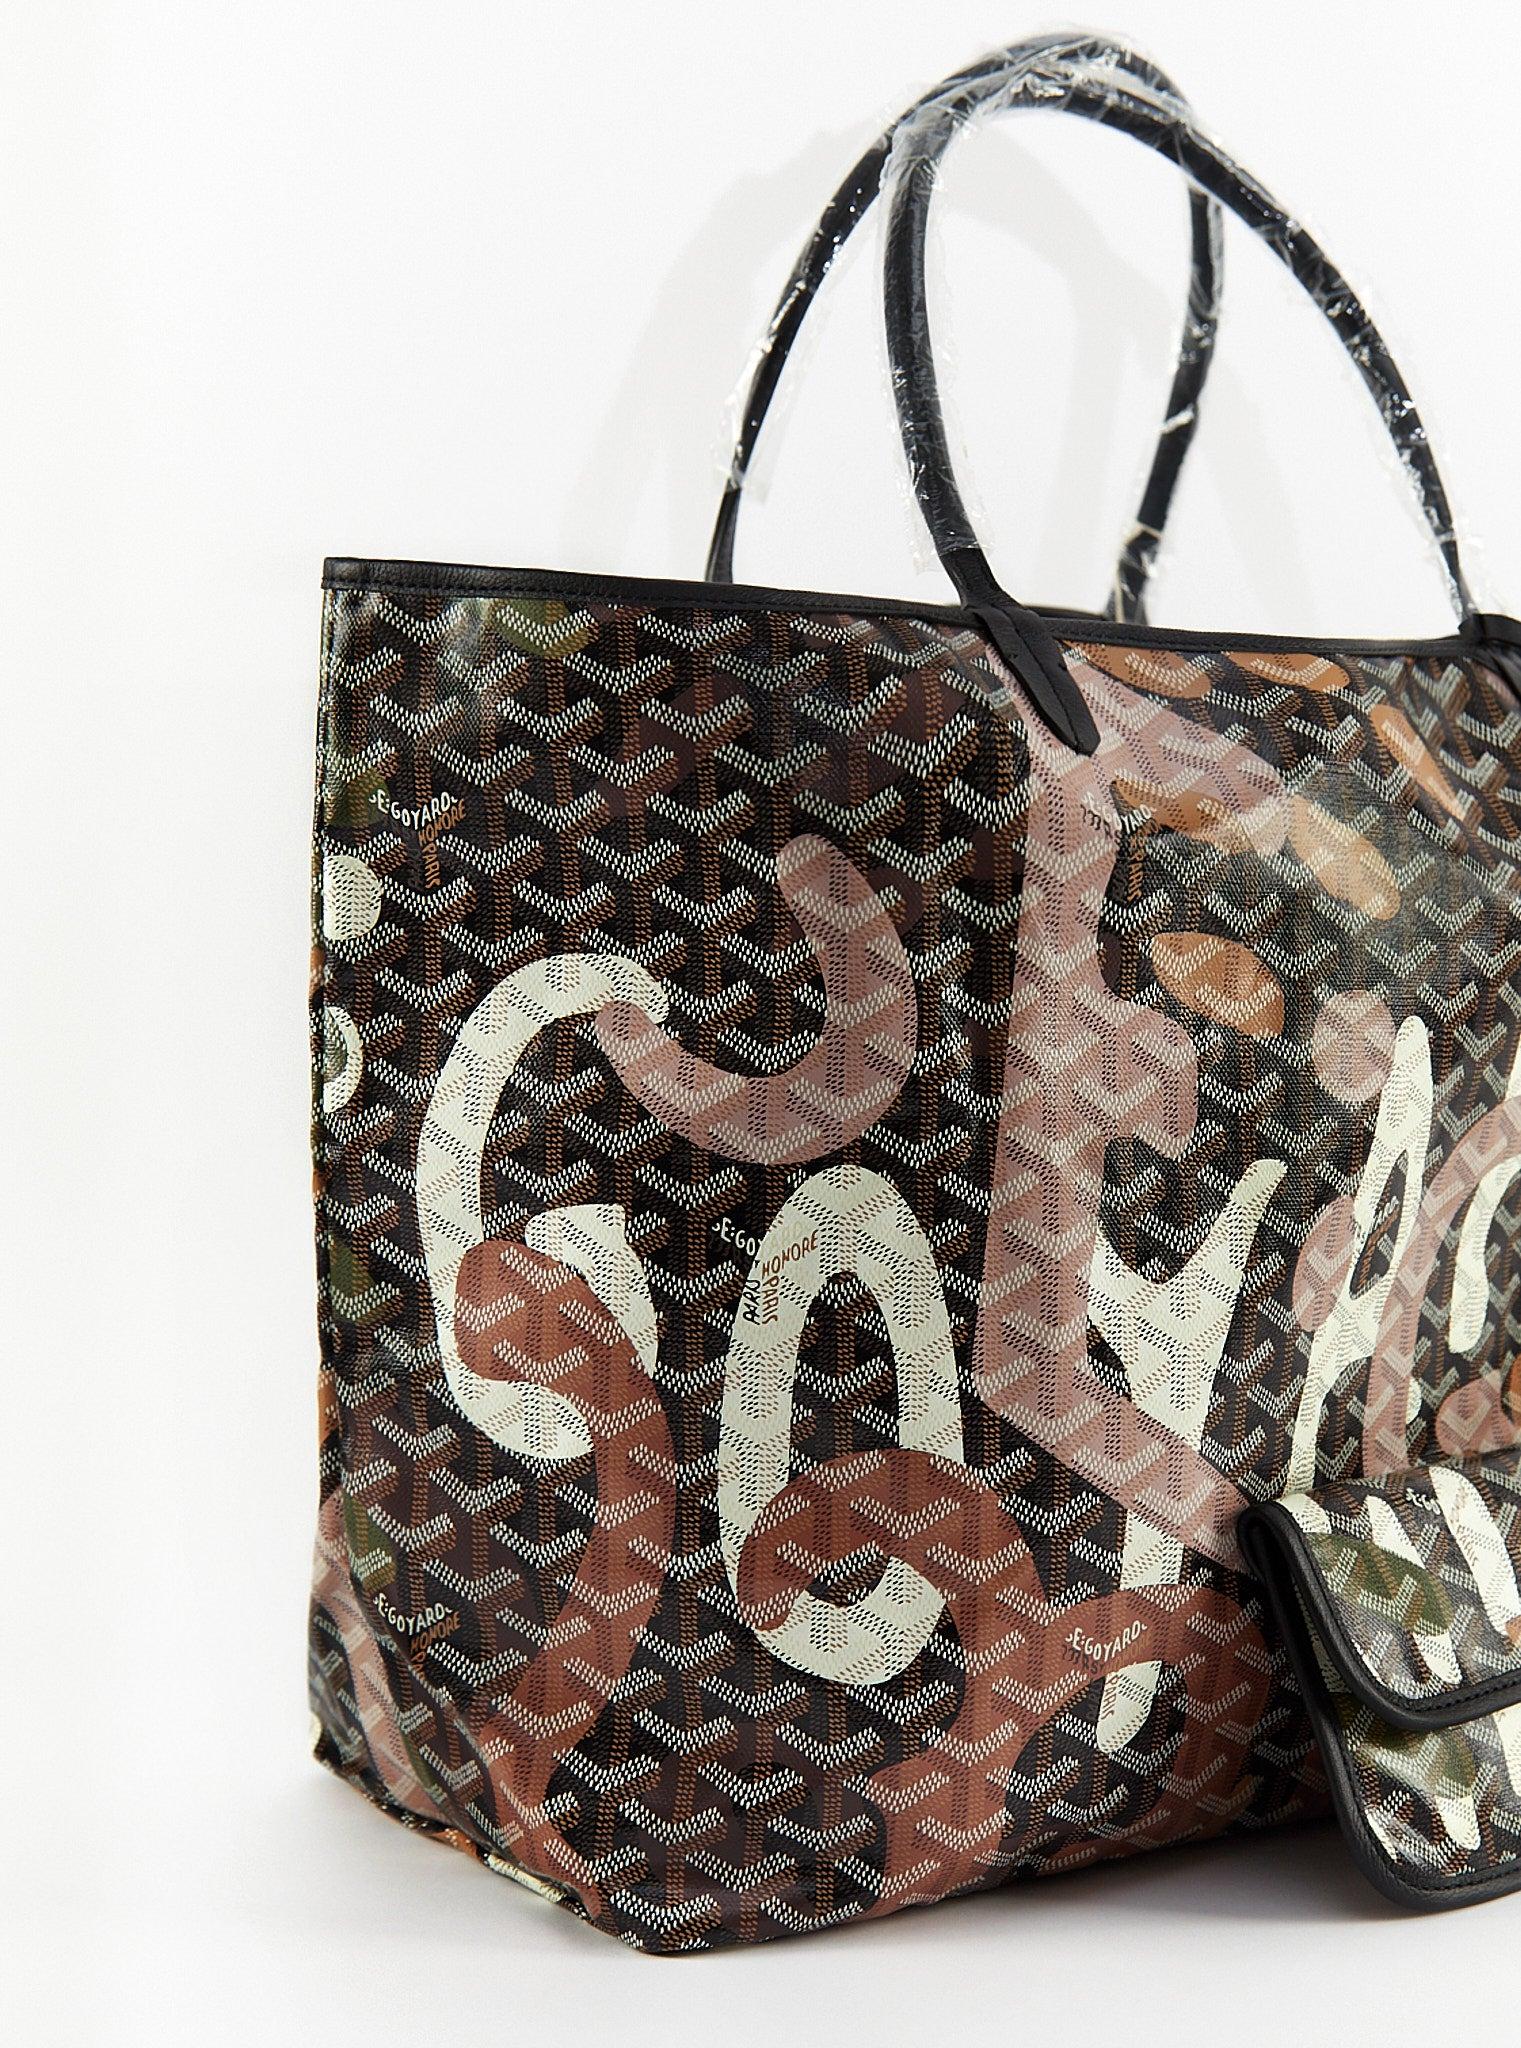 GOYARD Saint Louis GM Lettres Camouflage Graffiti Bag In Excellent Condition For Sale In London, GB